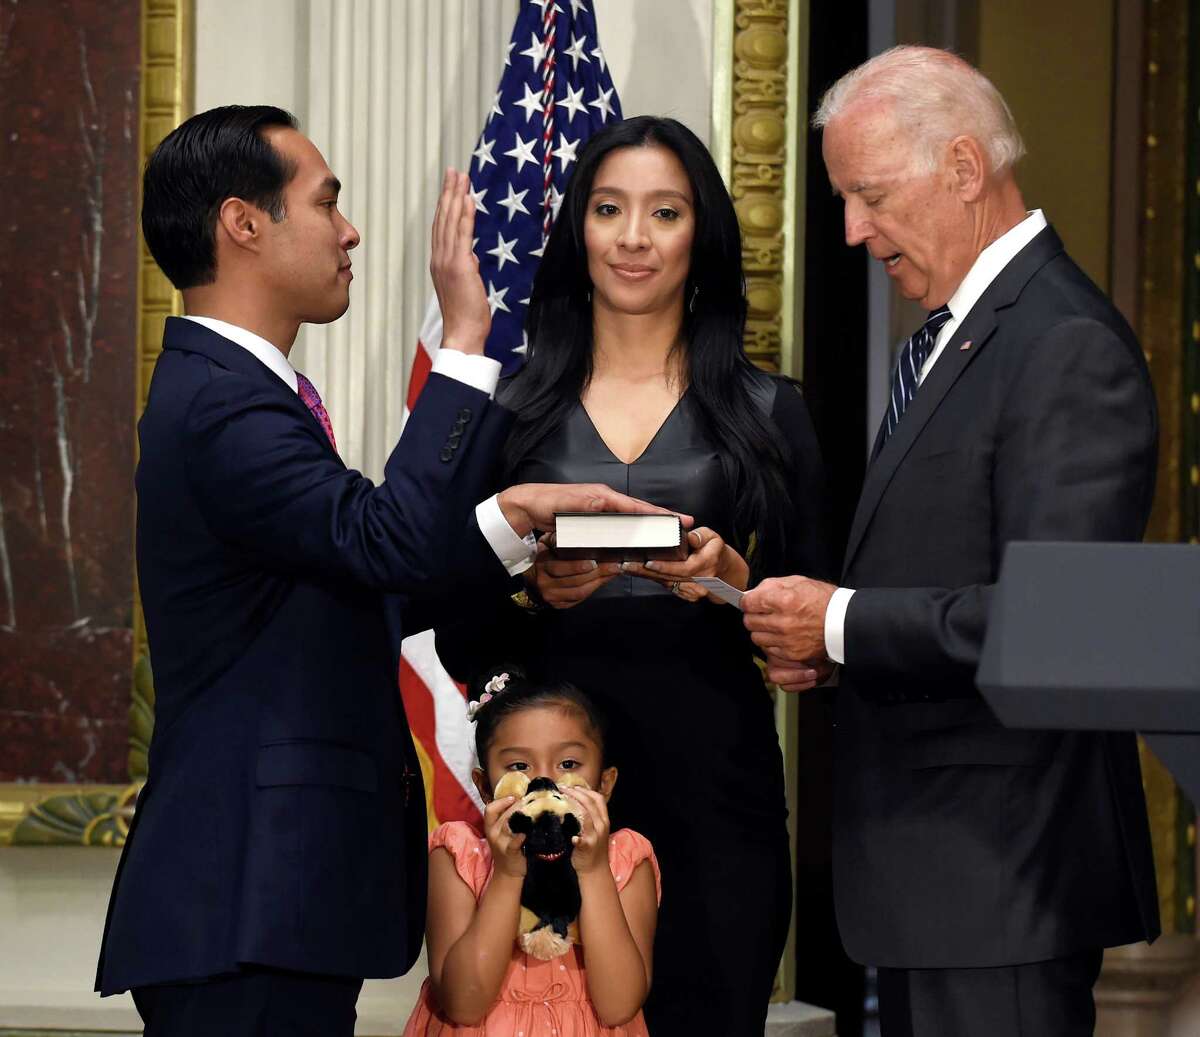 Then-Vice President Joe Biden ceremonially swears in Julian Castro, left, as Housing and Urban Development Secretary, Monday, Aug. 18, 2014, in the Eisenhower Executive Office Building on the White House complex in Washington. Castro's wife Erica Castro, holds the bible as his daughter, Carina Castro, center bottom, listens.